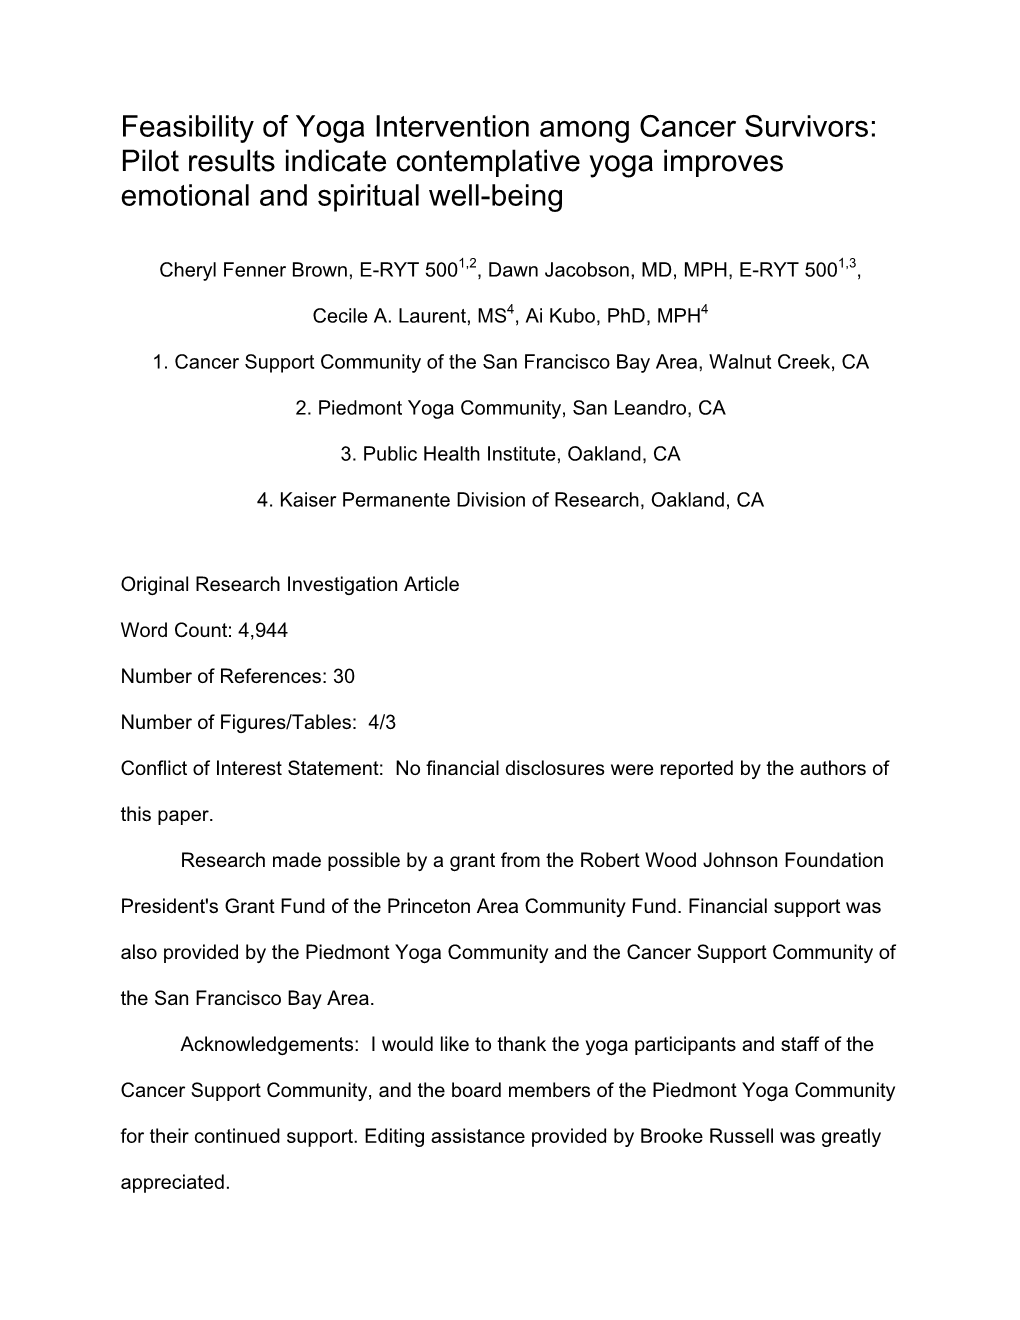 Feasibility of Yoga Intervention Among Cancer Survivors: Pilot Results Indicate Contemplative Yoga Improves Emotional and Spiritual Well-Being